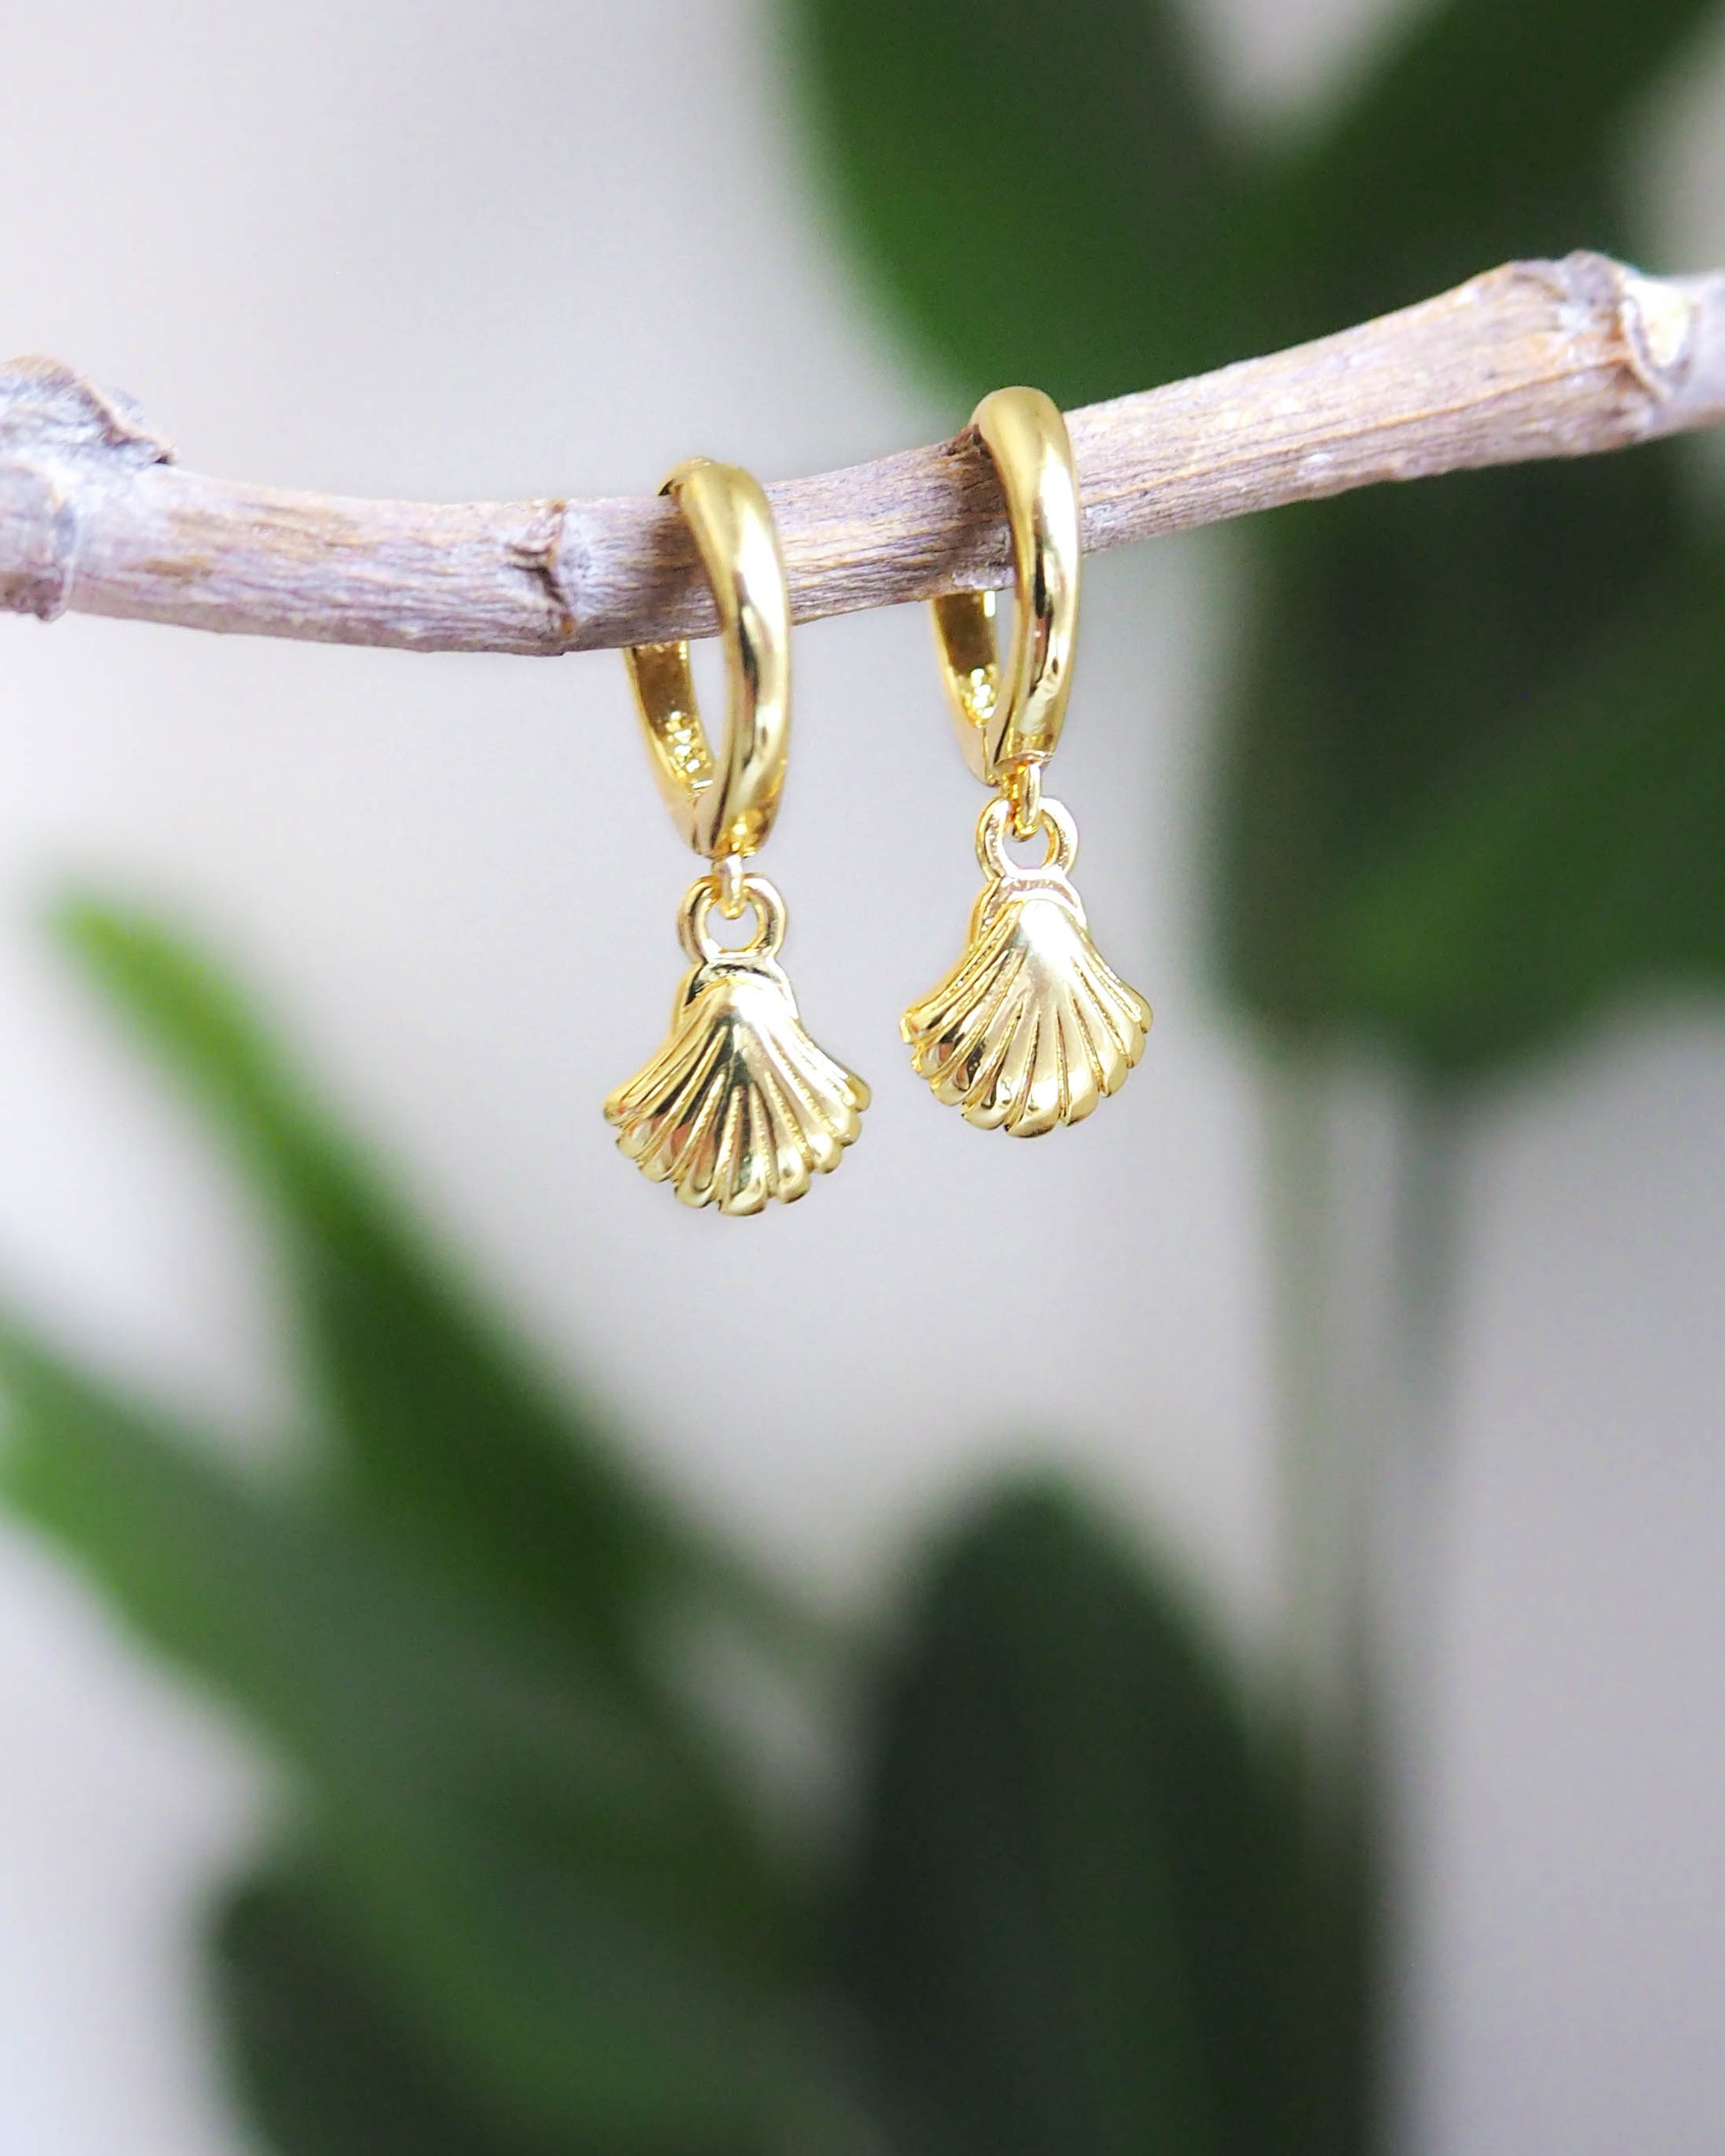 Gold Plated Shell Earrings - 925 Sterling Silver - Sea by Lou jewelry - Coastal Style